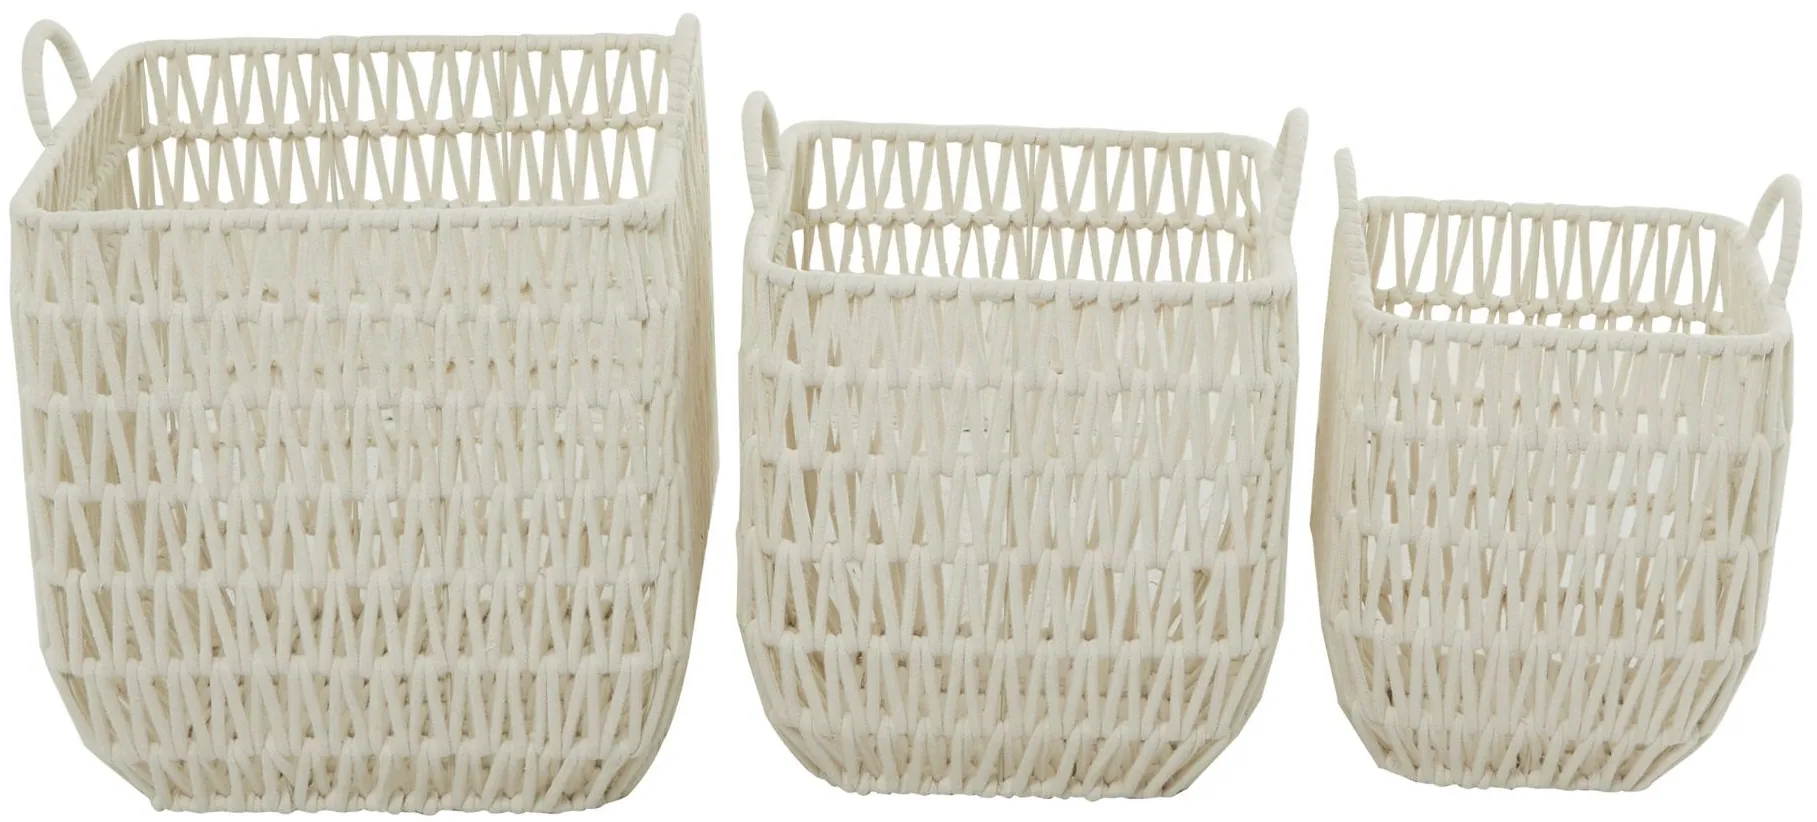 Ivy Collection Set of 3 White Cotton Baskets in White by UMA Enterprises